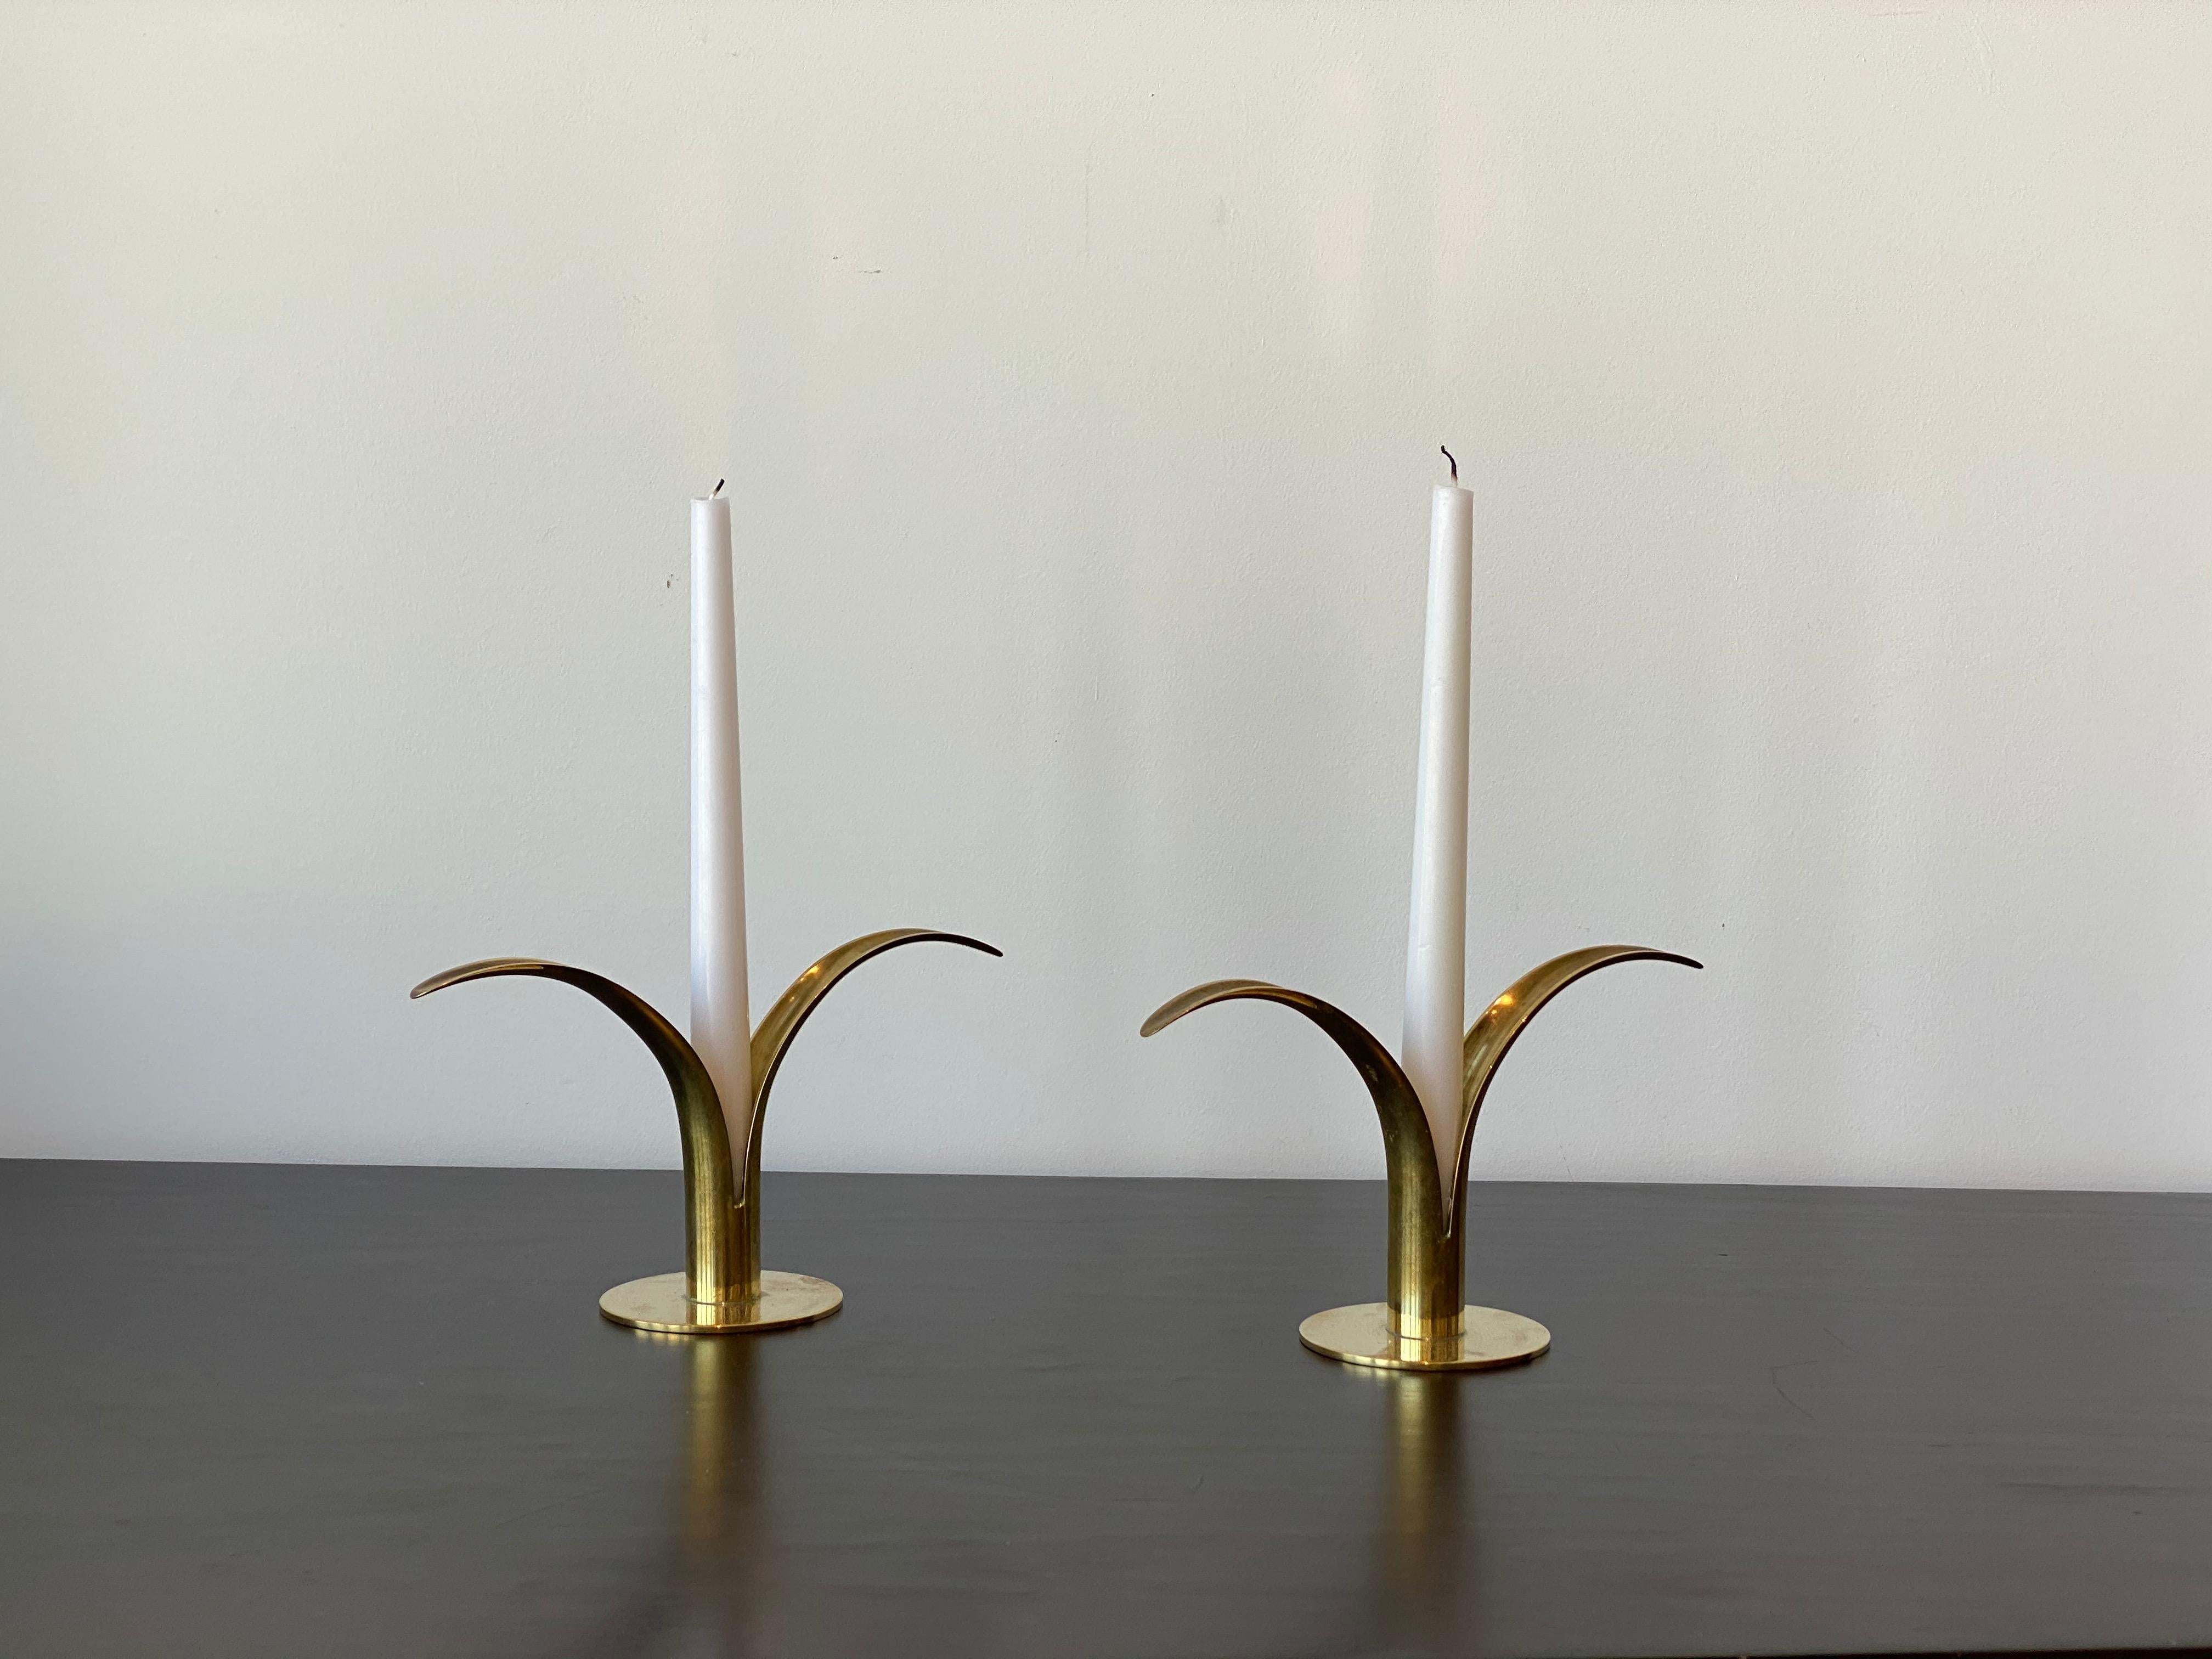 A pair of organic candlesticks / candleholders, designed by Ivar Åhlenius Björk for Ystad Metall, Sweden, 1950s. In brass and lacquered steel. Stamped.

Other designers of the period include Piet Hein, Paavo Tynell, Josef Frank, and Jean